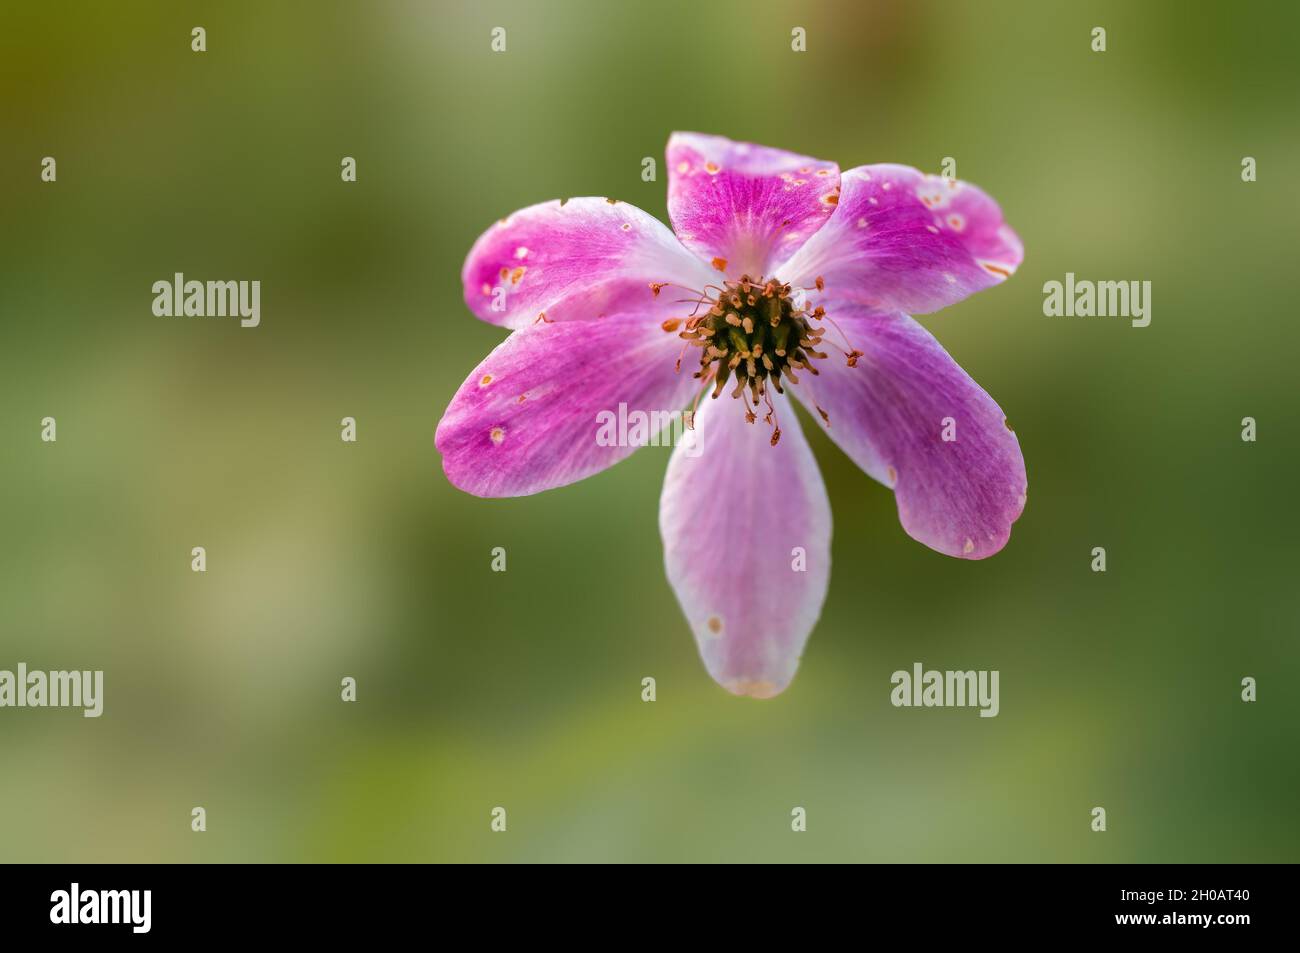 a delicate purple wood anemone flowers in a forest Stock Photo